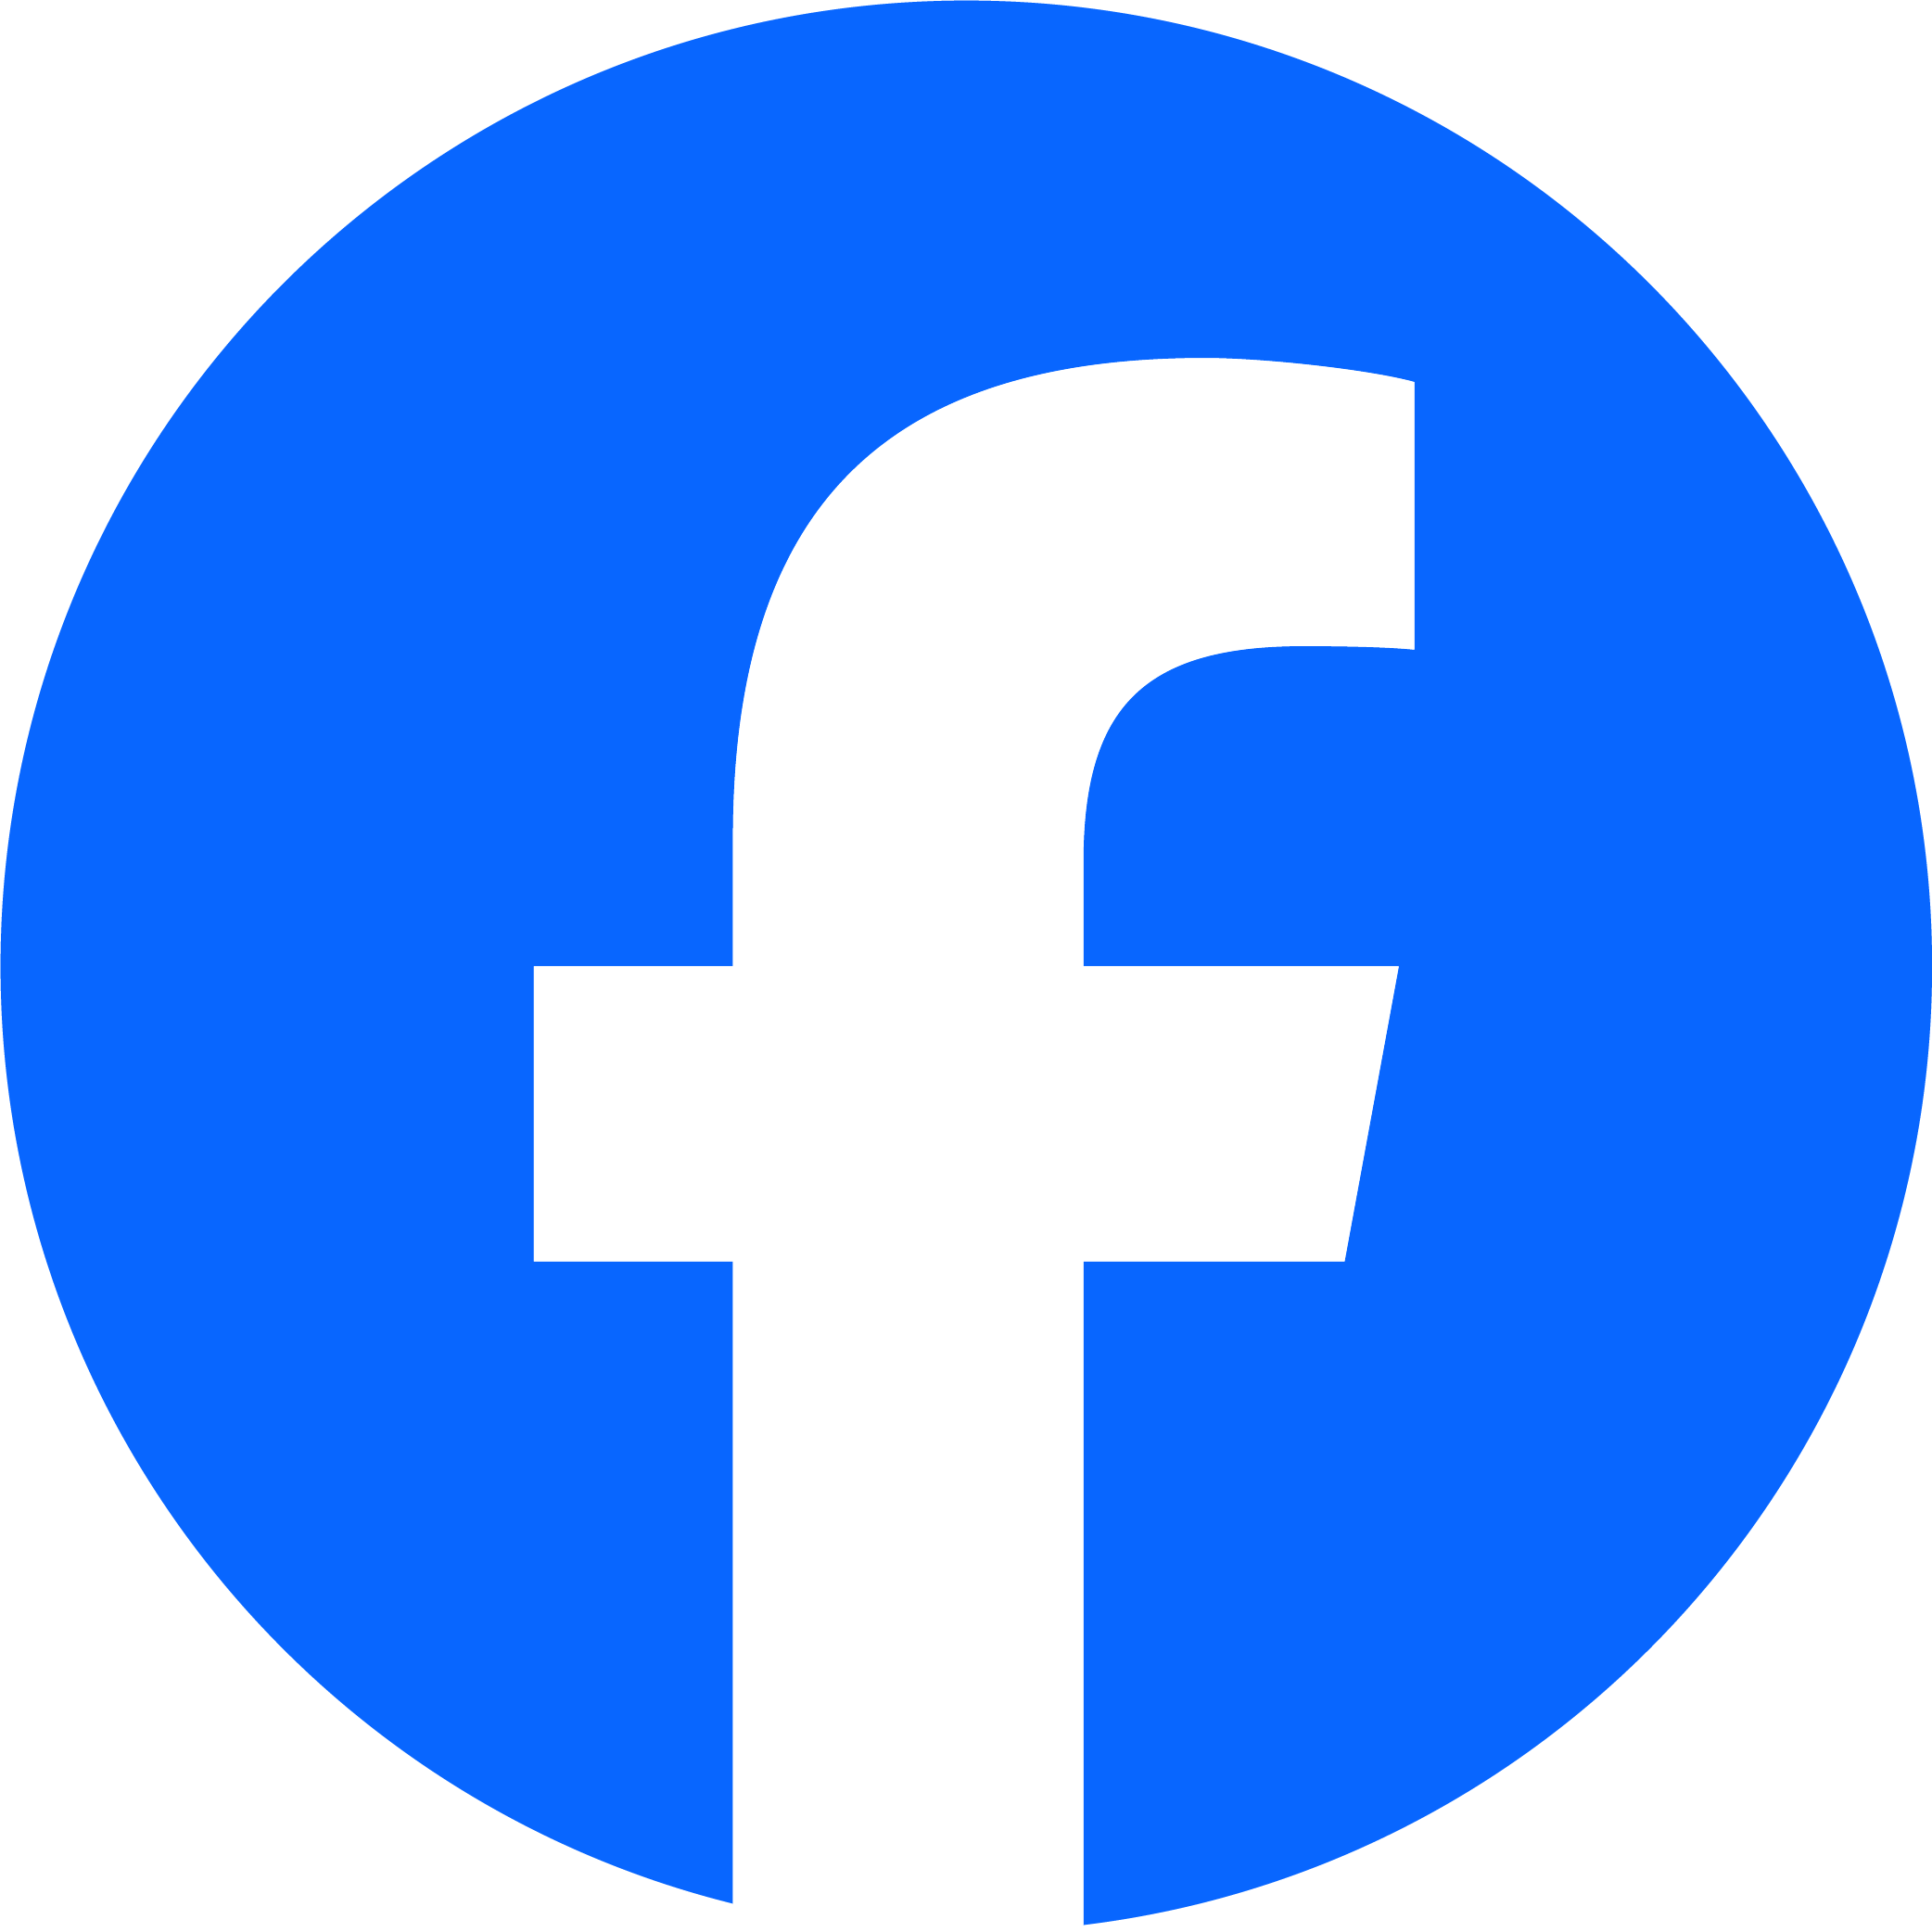 The Facebook logo with a link to our Facebook page